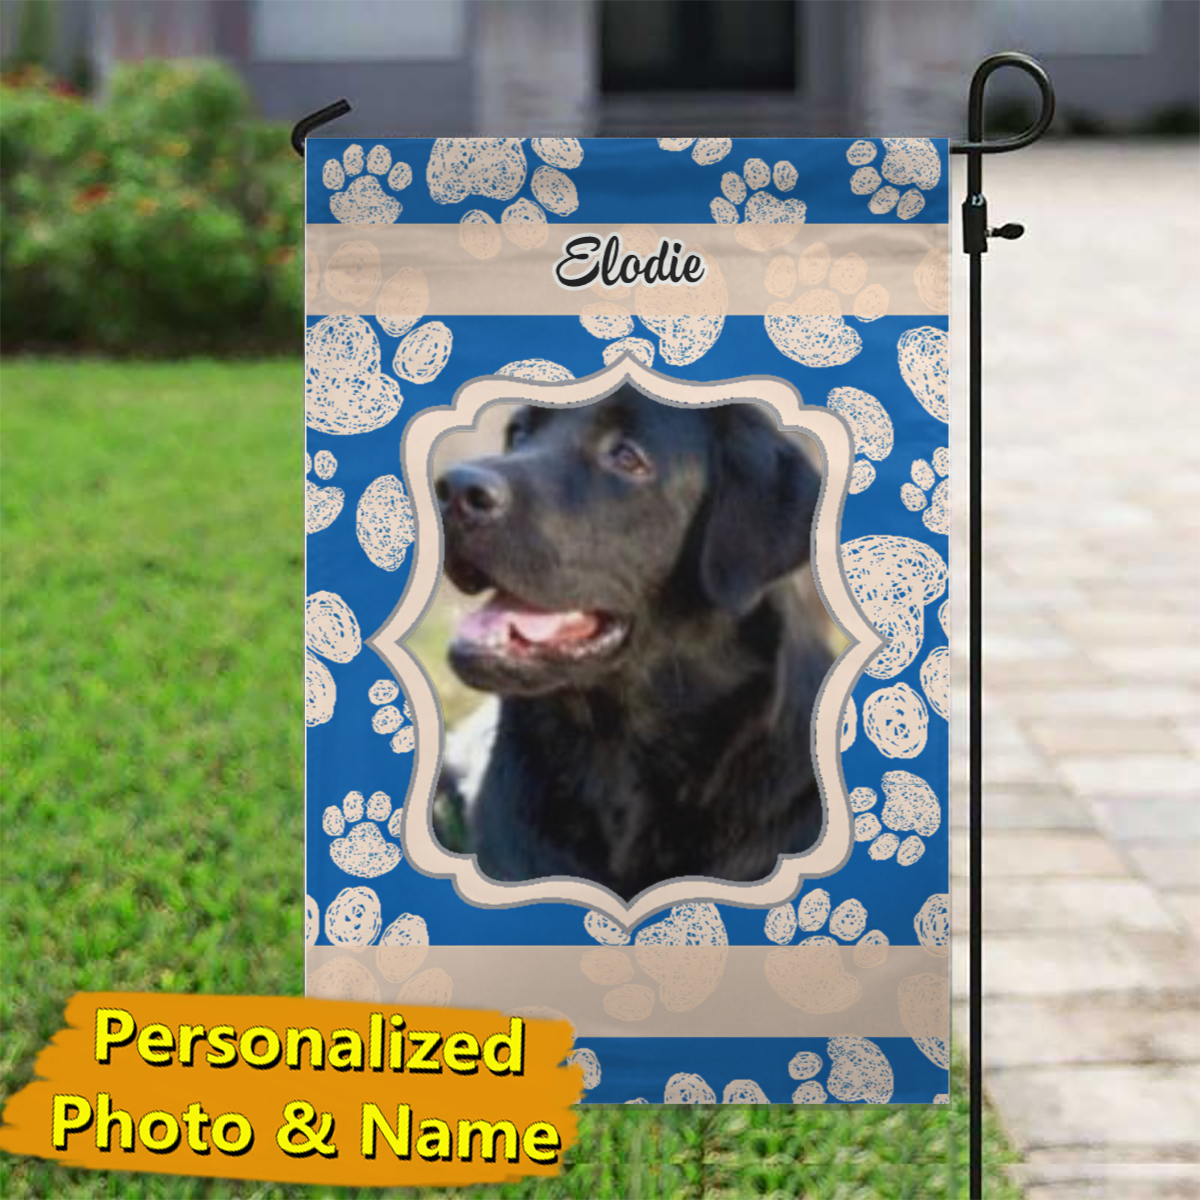 Beloved Pet – Personalized Photo & Name – Garden Flag & House Flag